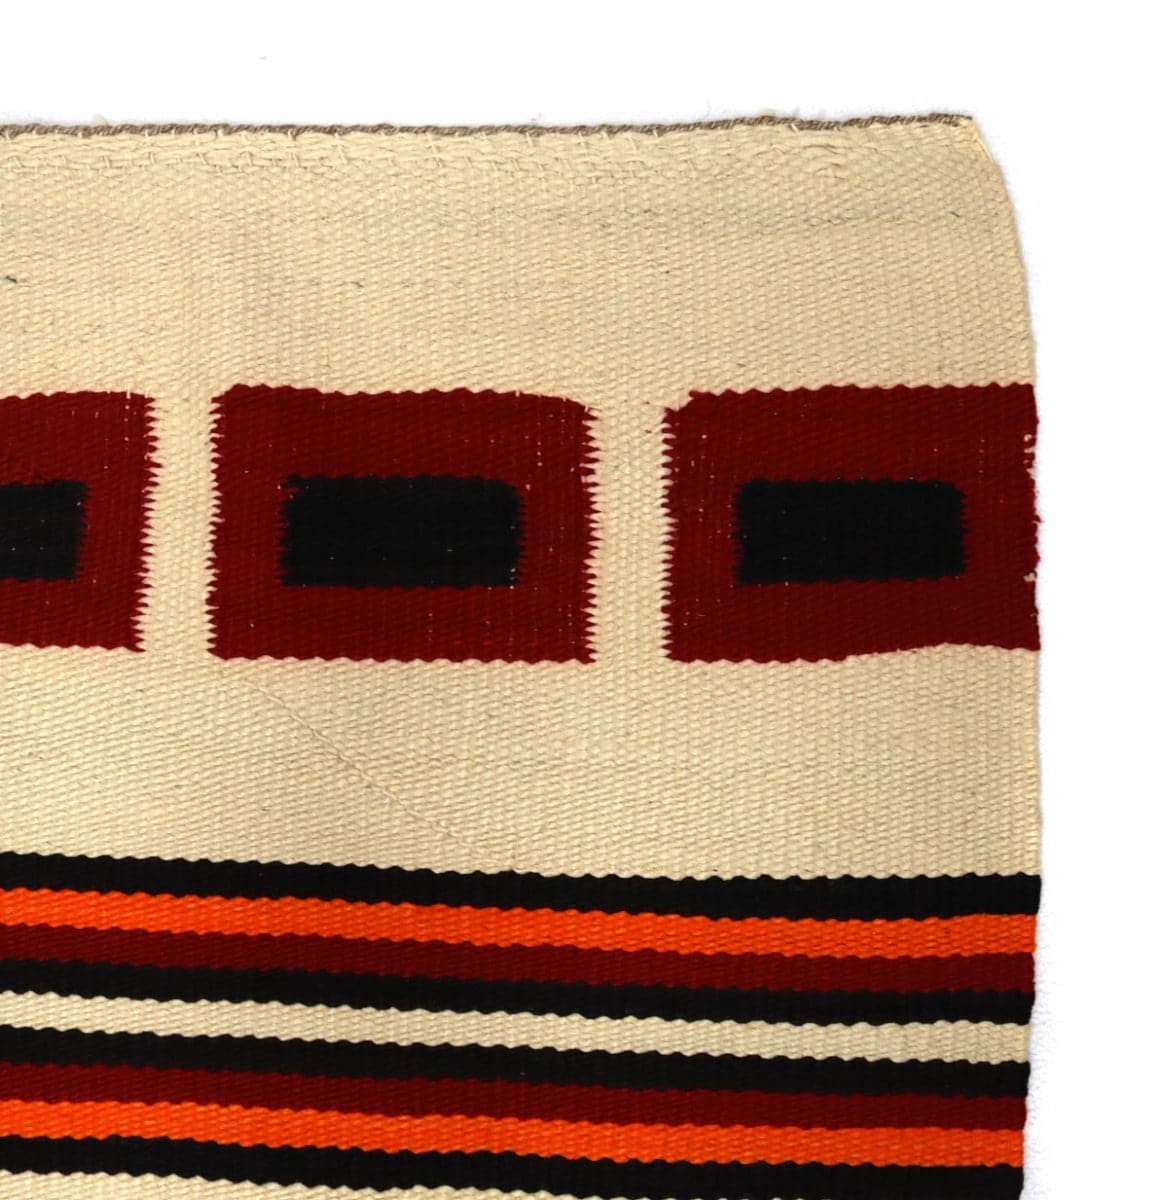 Navajo Banded Blanket c. 1900s, 58.5" x 36.5" (T90404A-1221-005) 2
